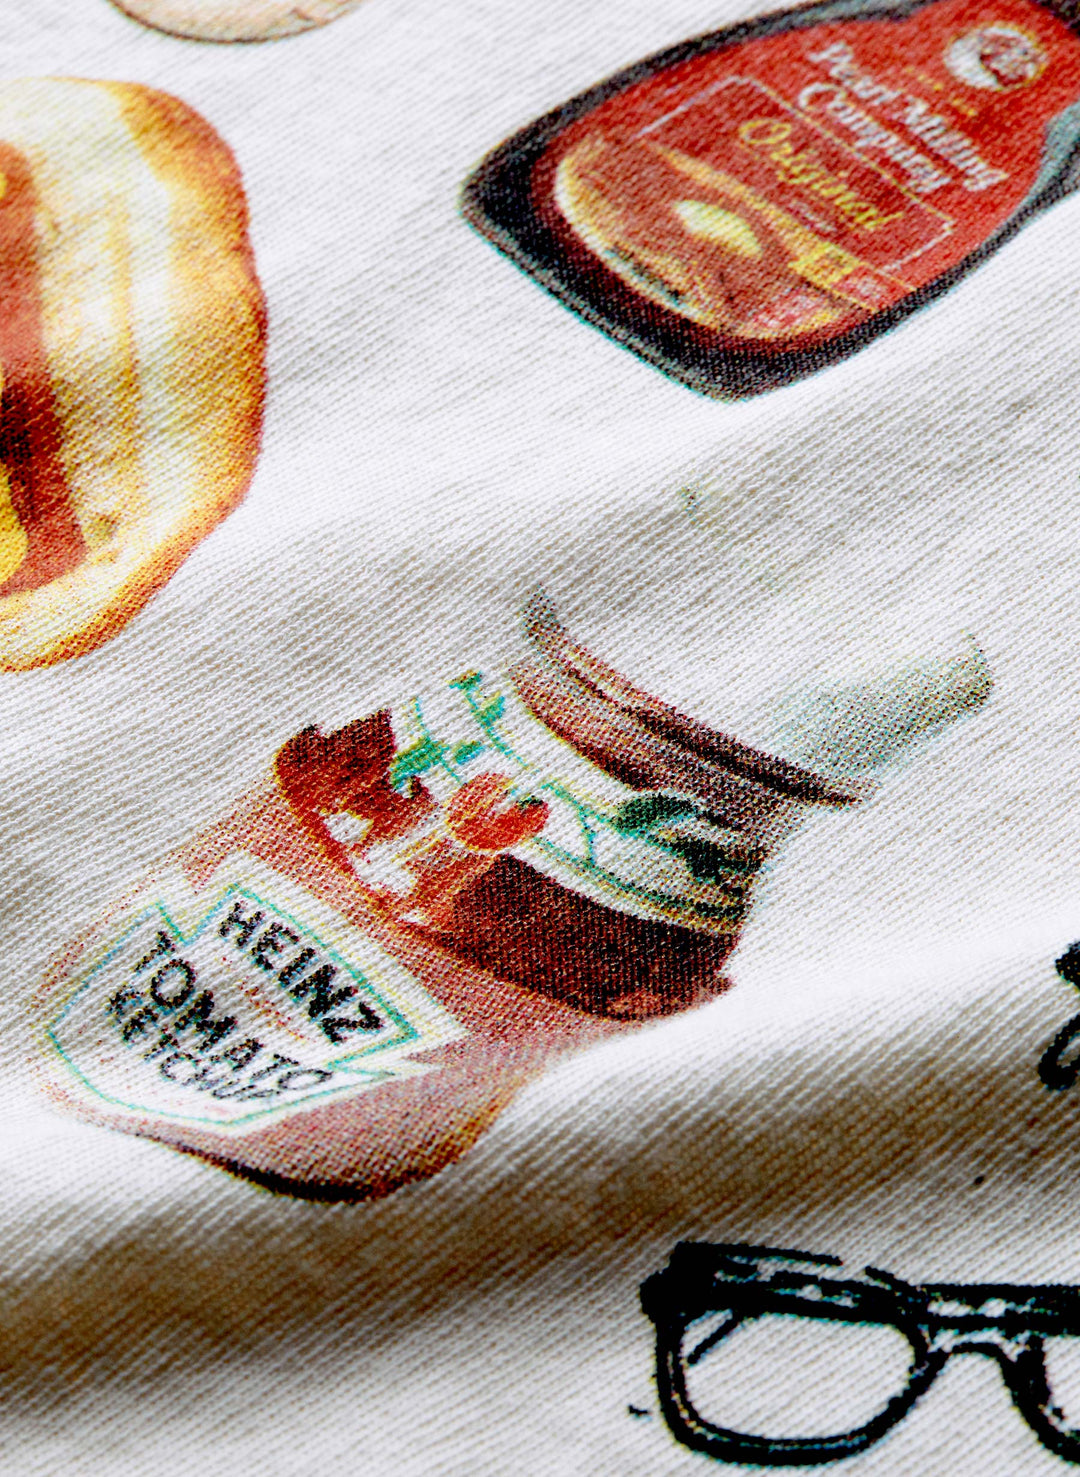 a close up of a fabric with a picture of a jar